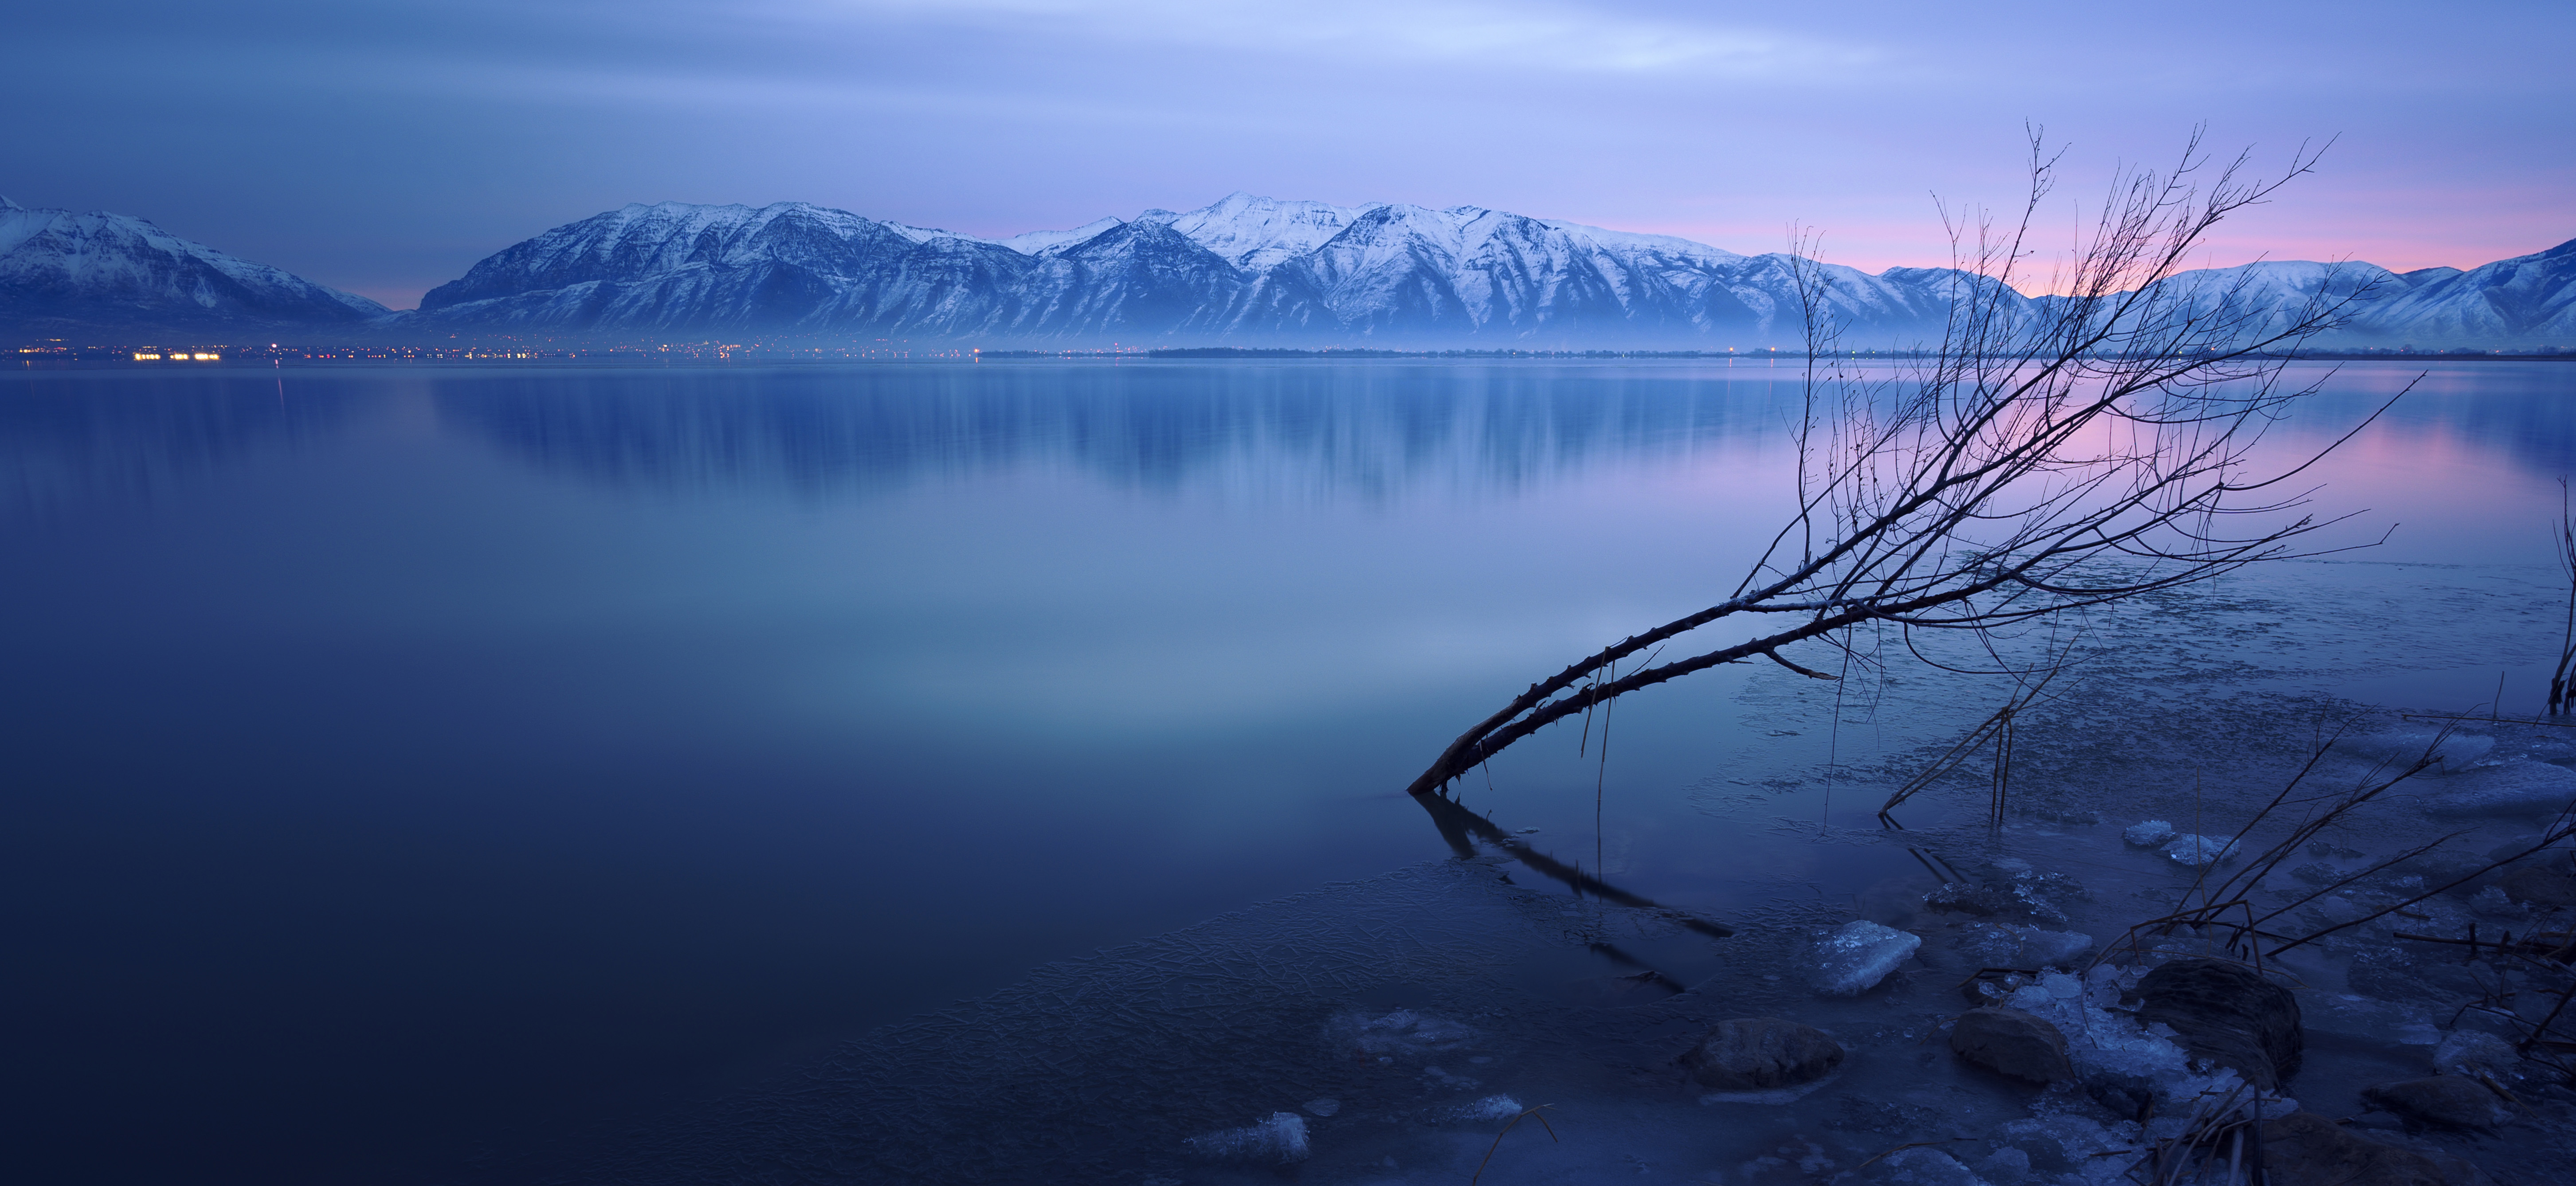 A Resolution Confirming Support for Science-Based Conservation, Restoration, and Enhancement of Utah Lake